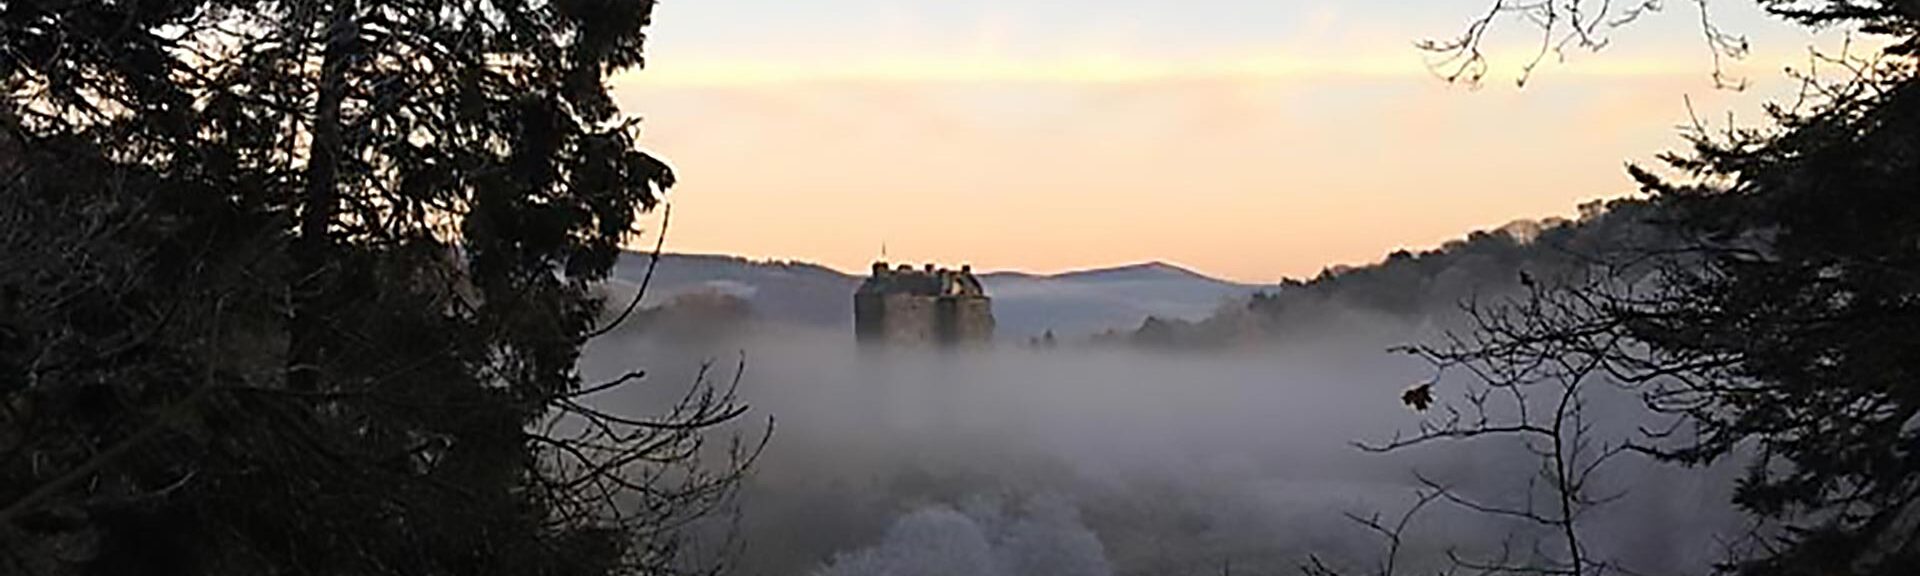 Mist-covered Neidpath Castle in Scotland viewed from the nearby forest on a crisp winter morning.